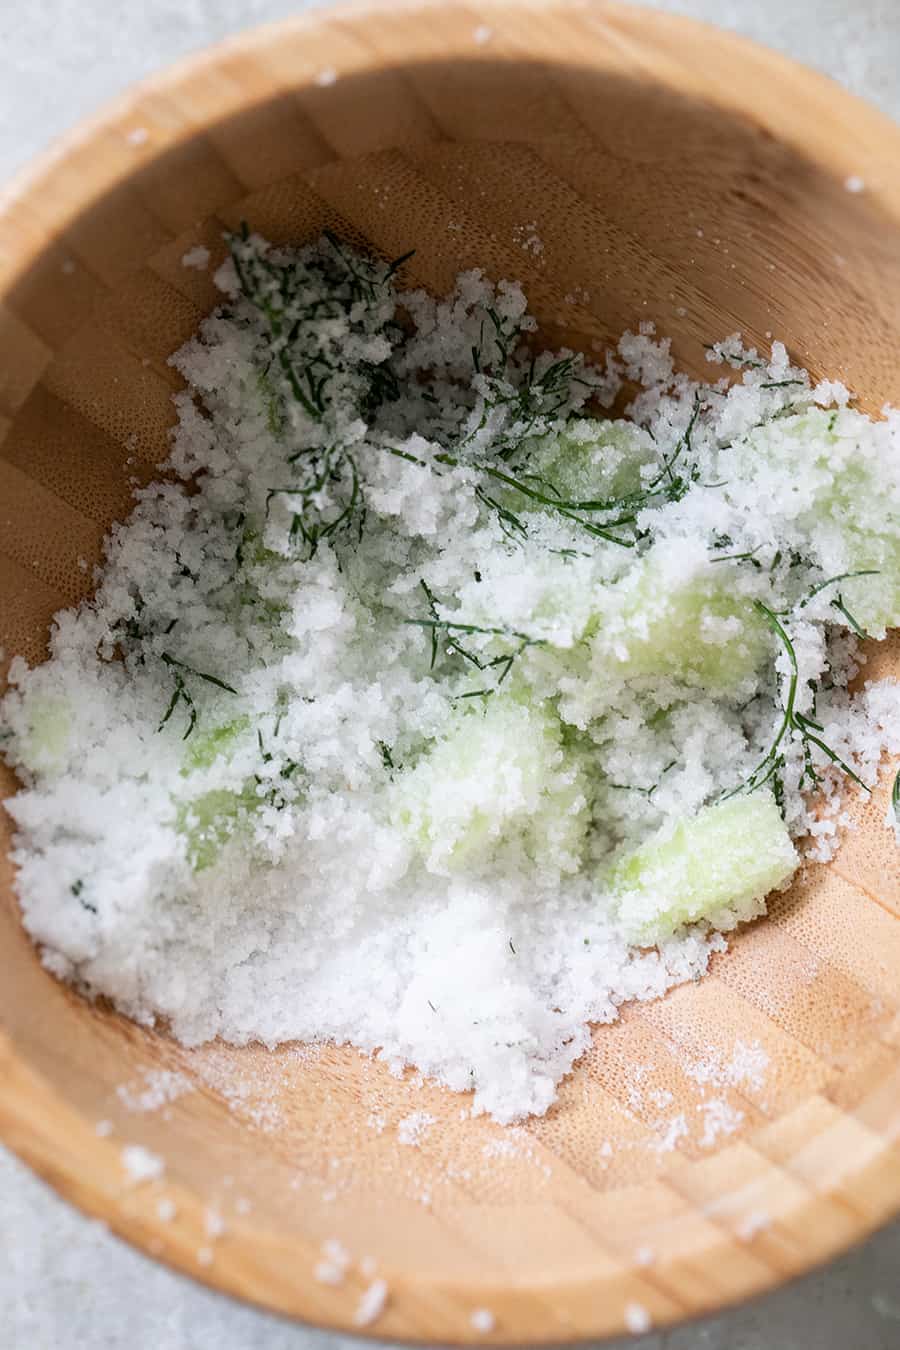 Dill and cucumber infused salt 